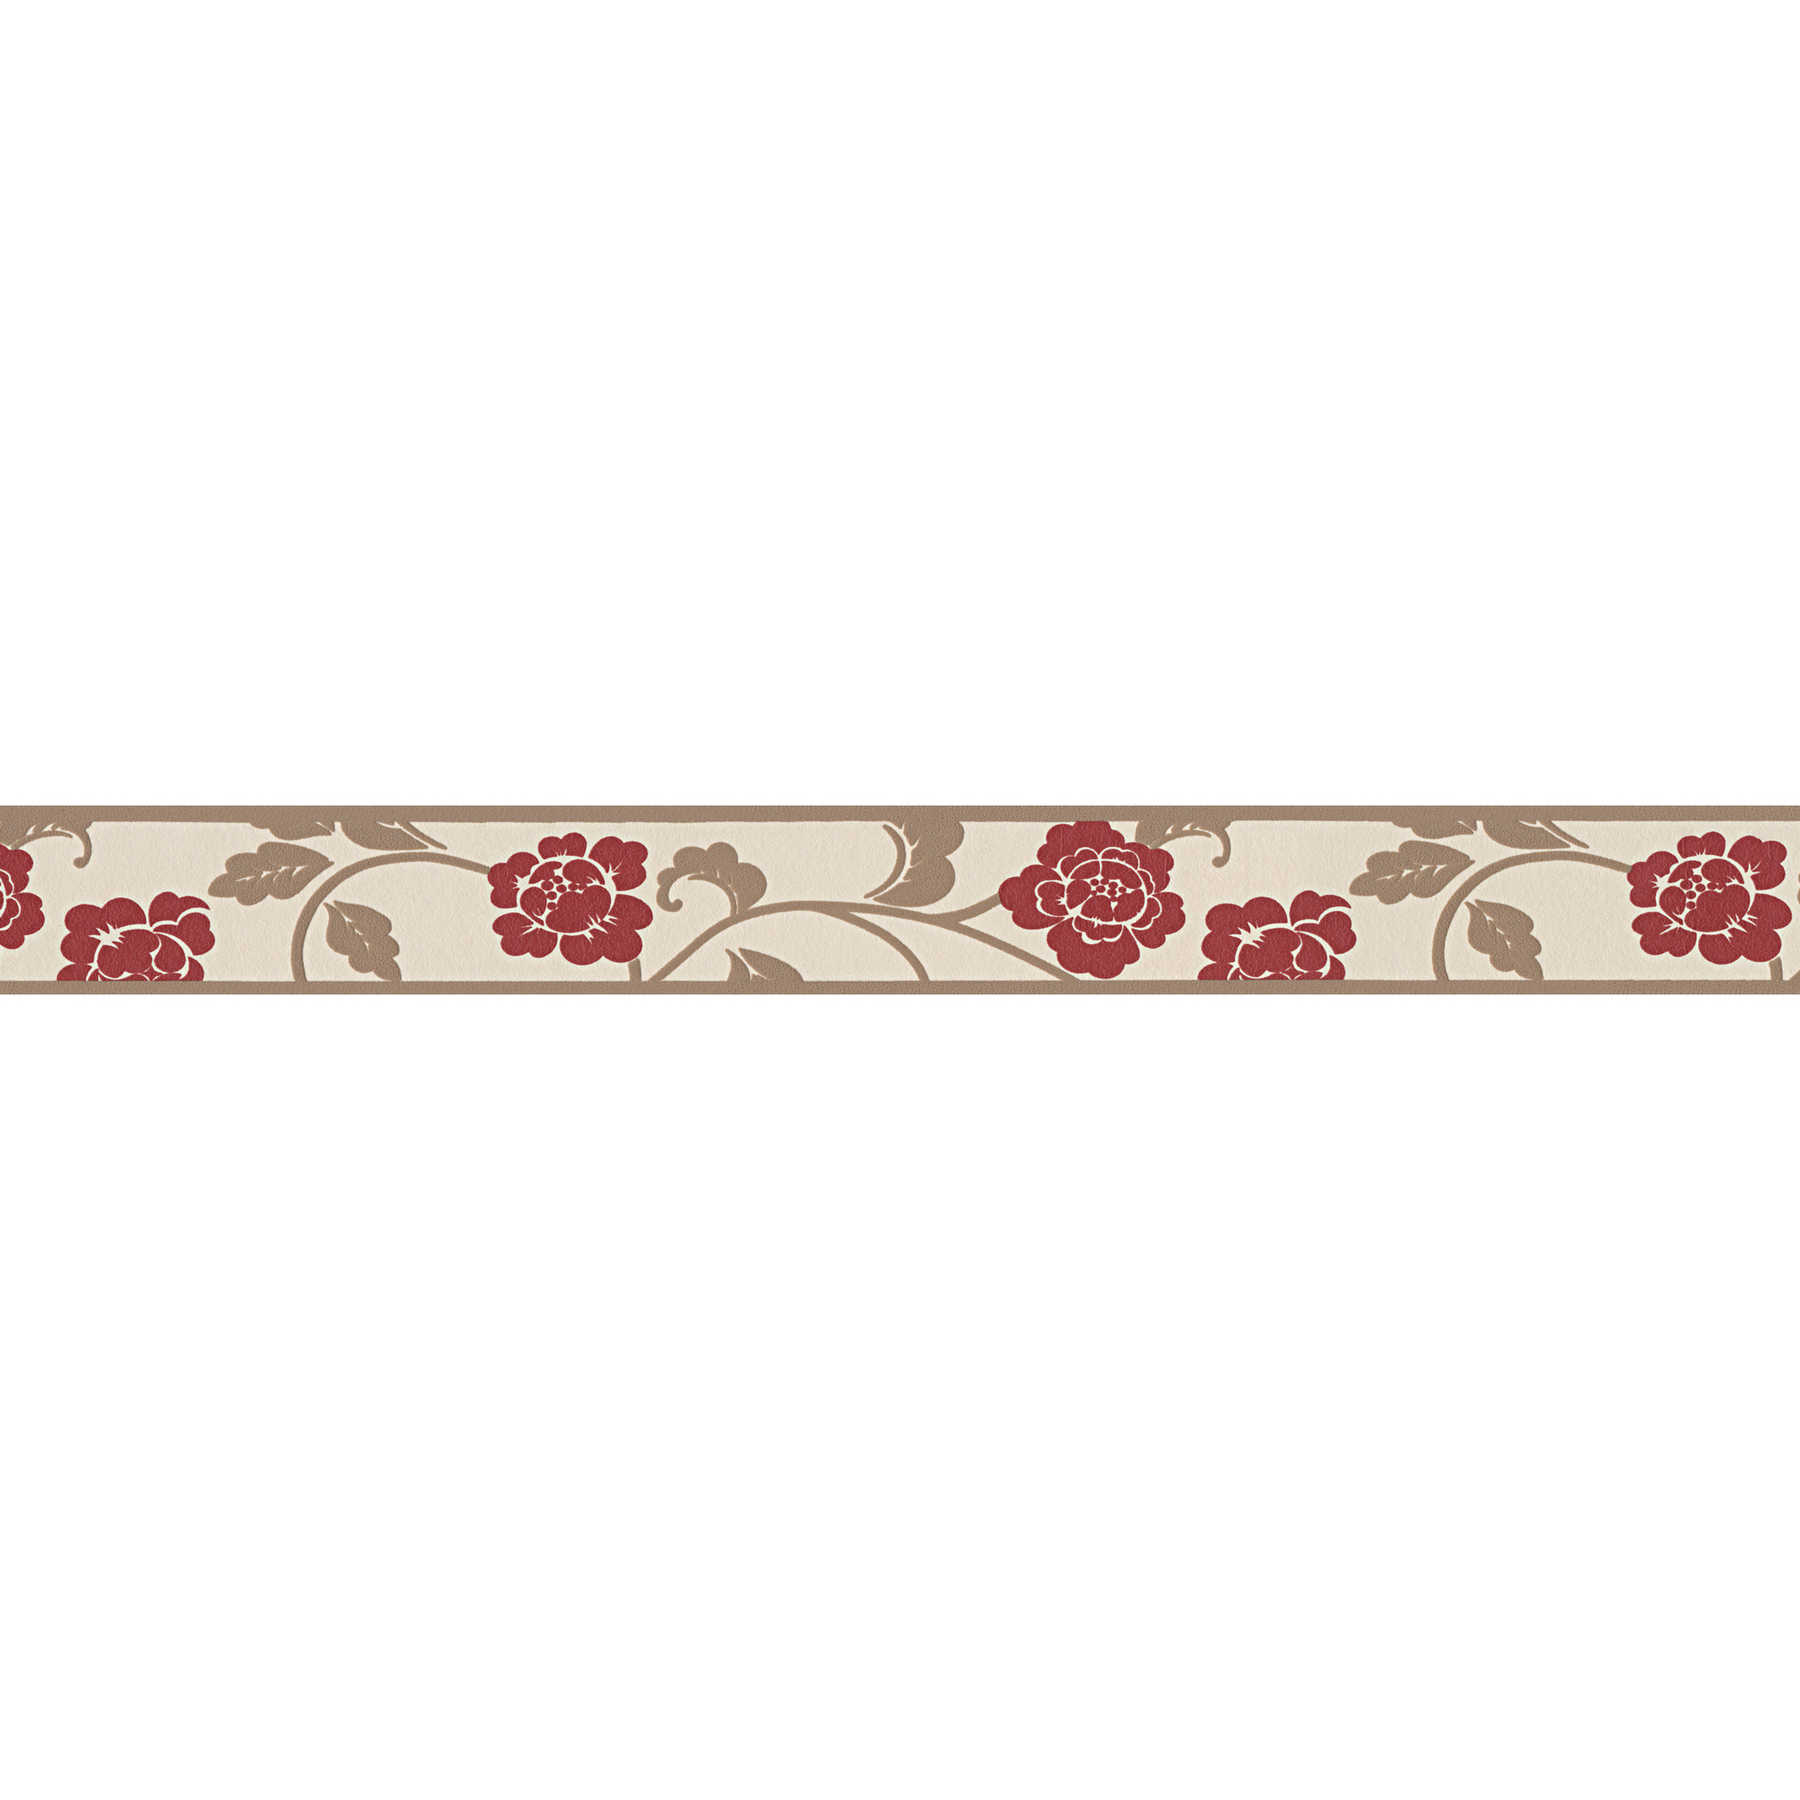         Border with flowers and leaves tendrils with textured pattern - Red, Brown, Beige
    